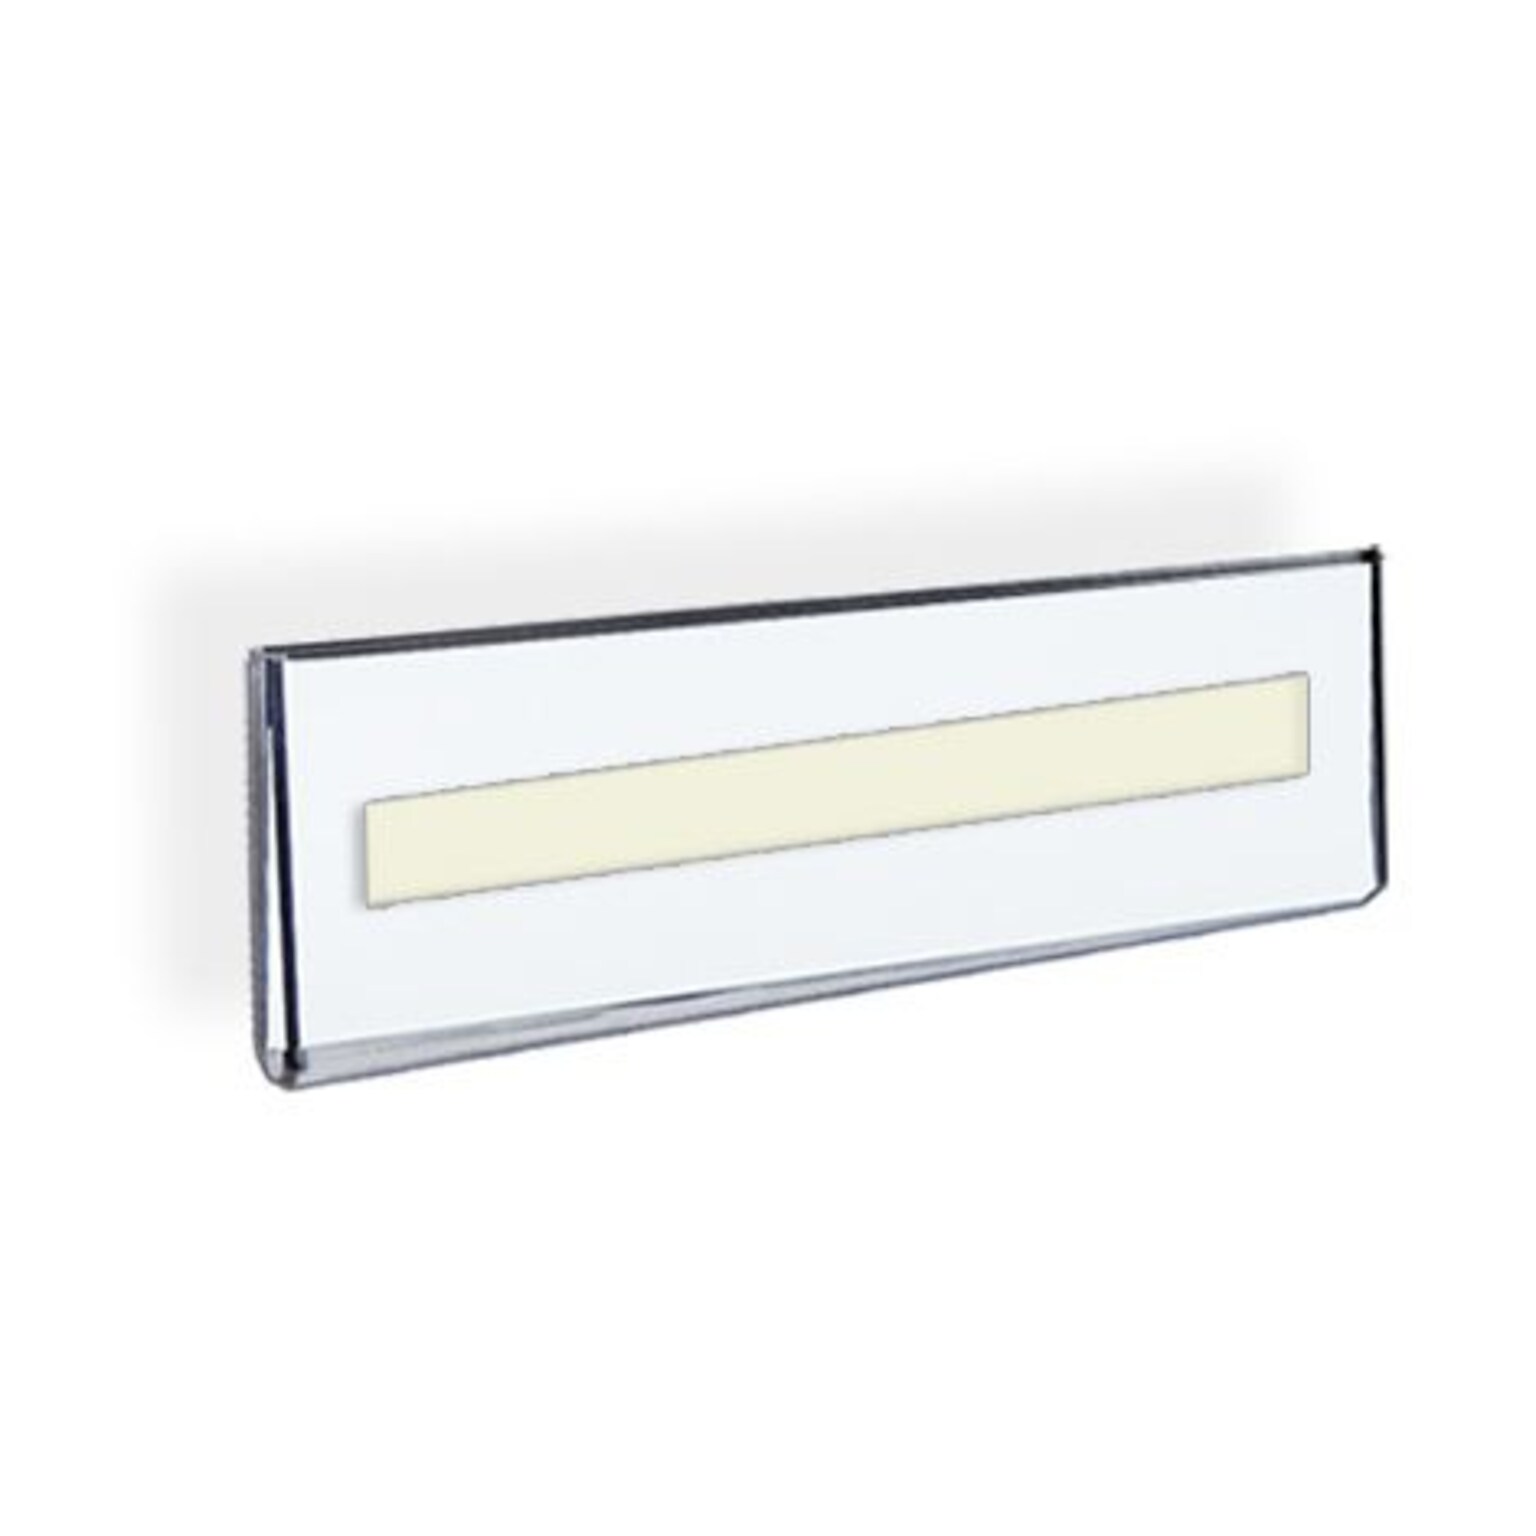 Azar Displays Adhesive Wall Sign Holder, 5.5W x 2.5H, Clear, 10/Pack (122015)